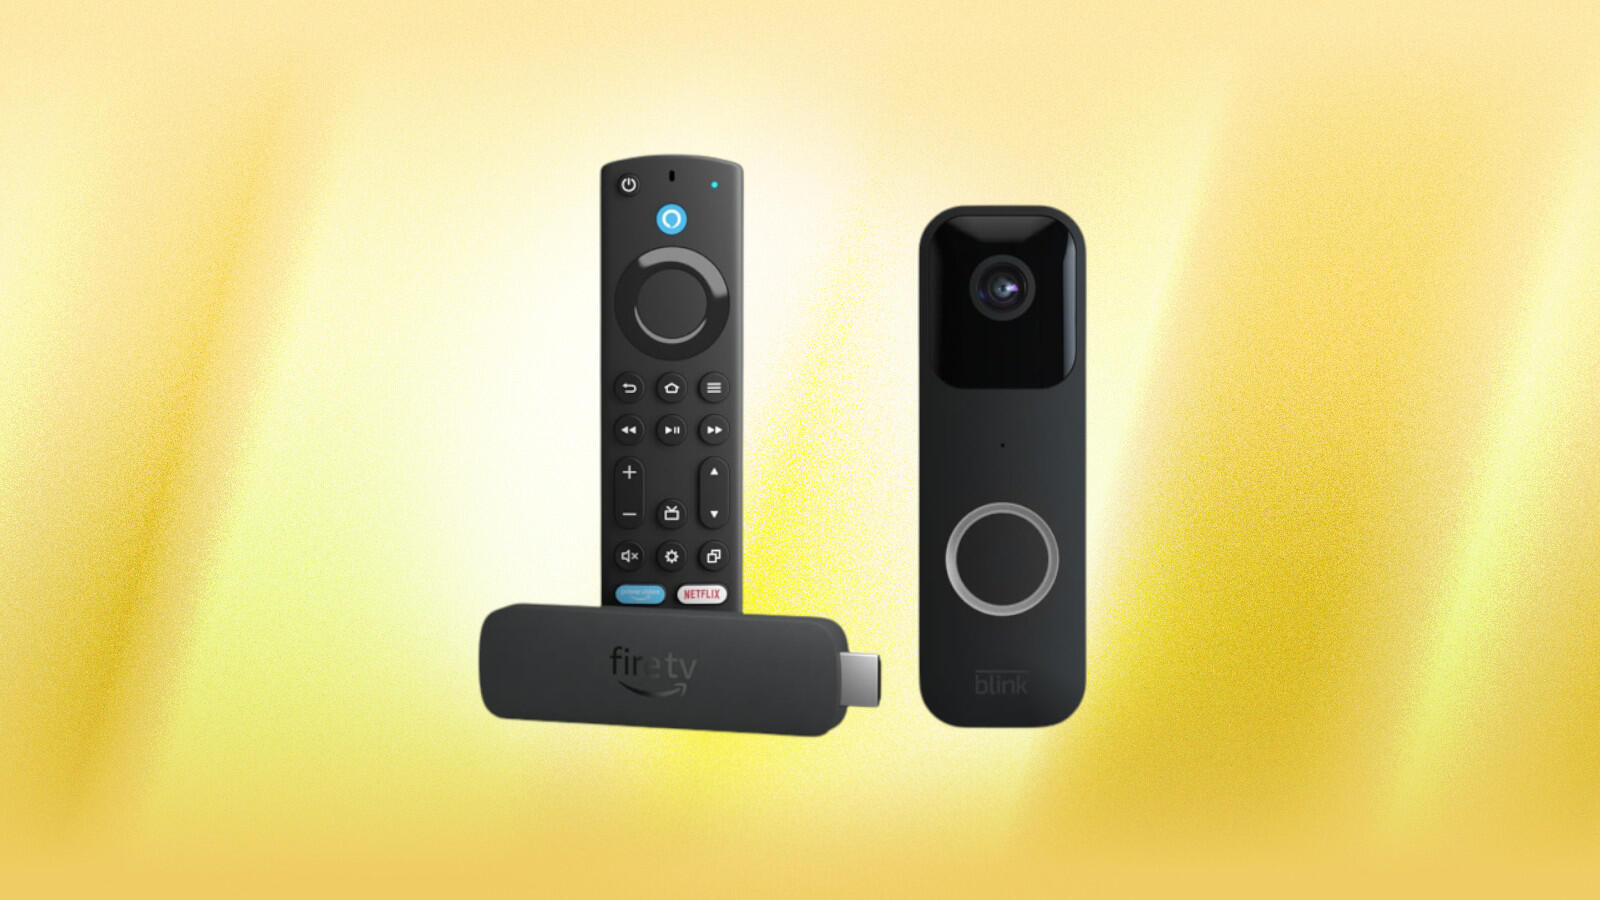 Get the New Fire TV 4K Max and a Blink Video Doorbell for Just $65 in This  Pre-Black Friday Deal - CNET